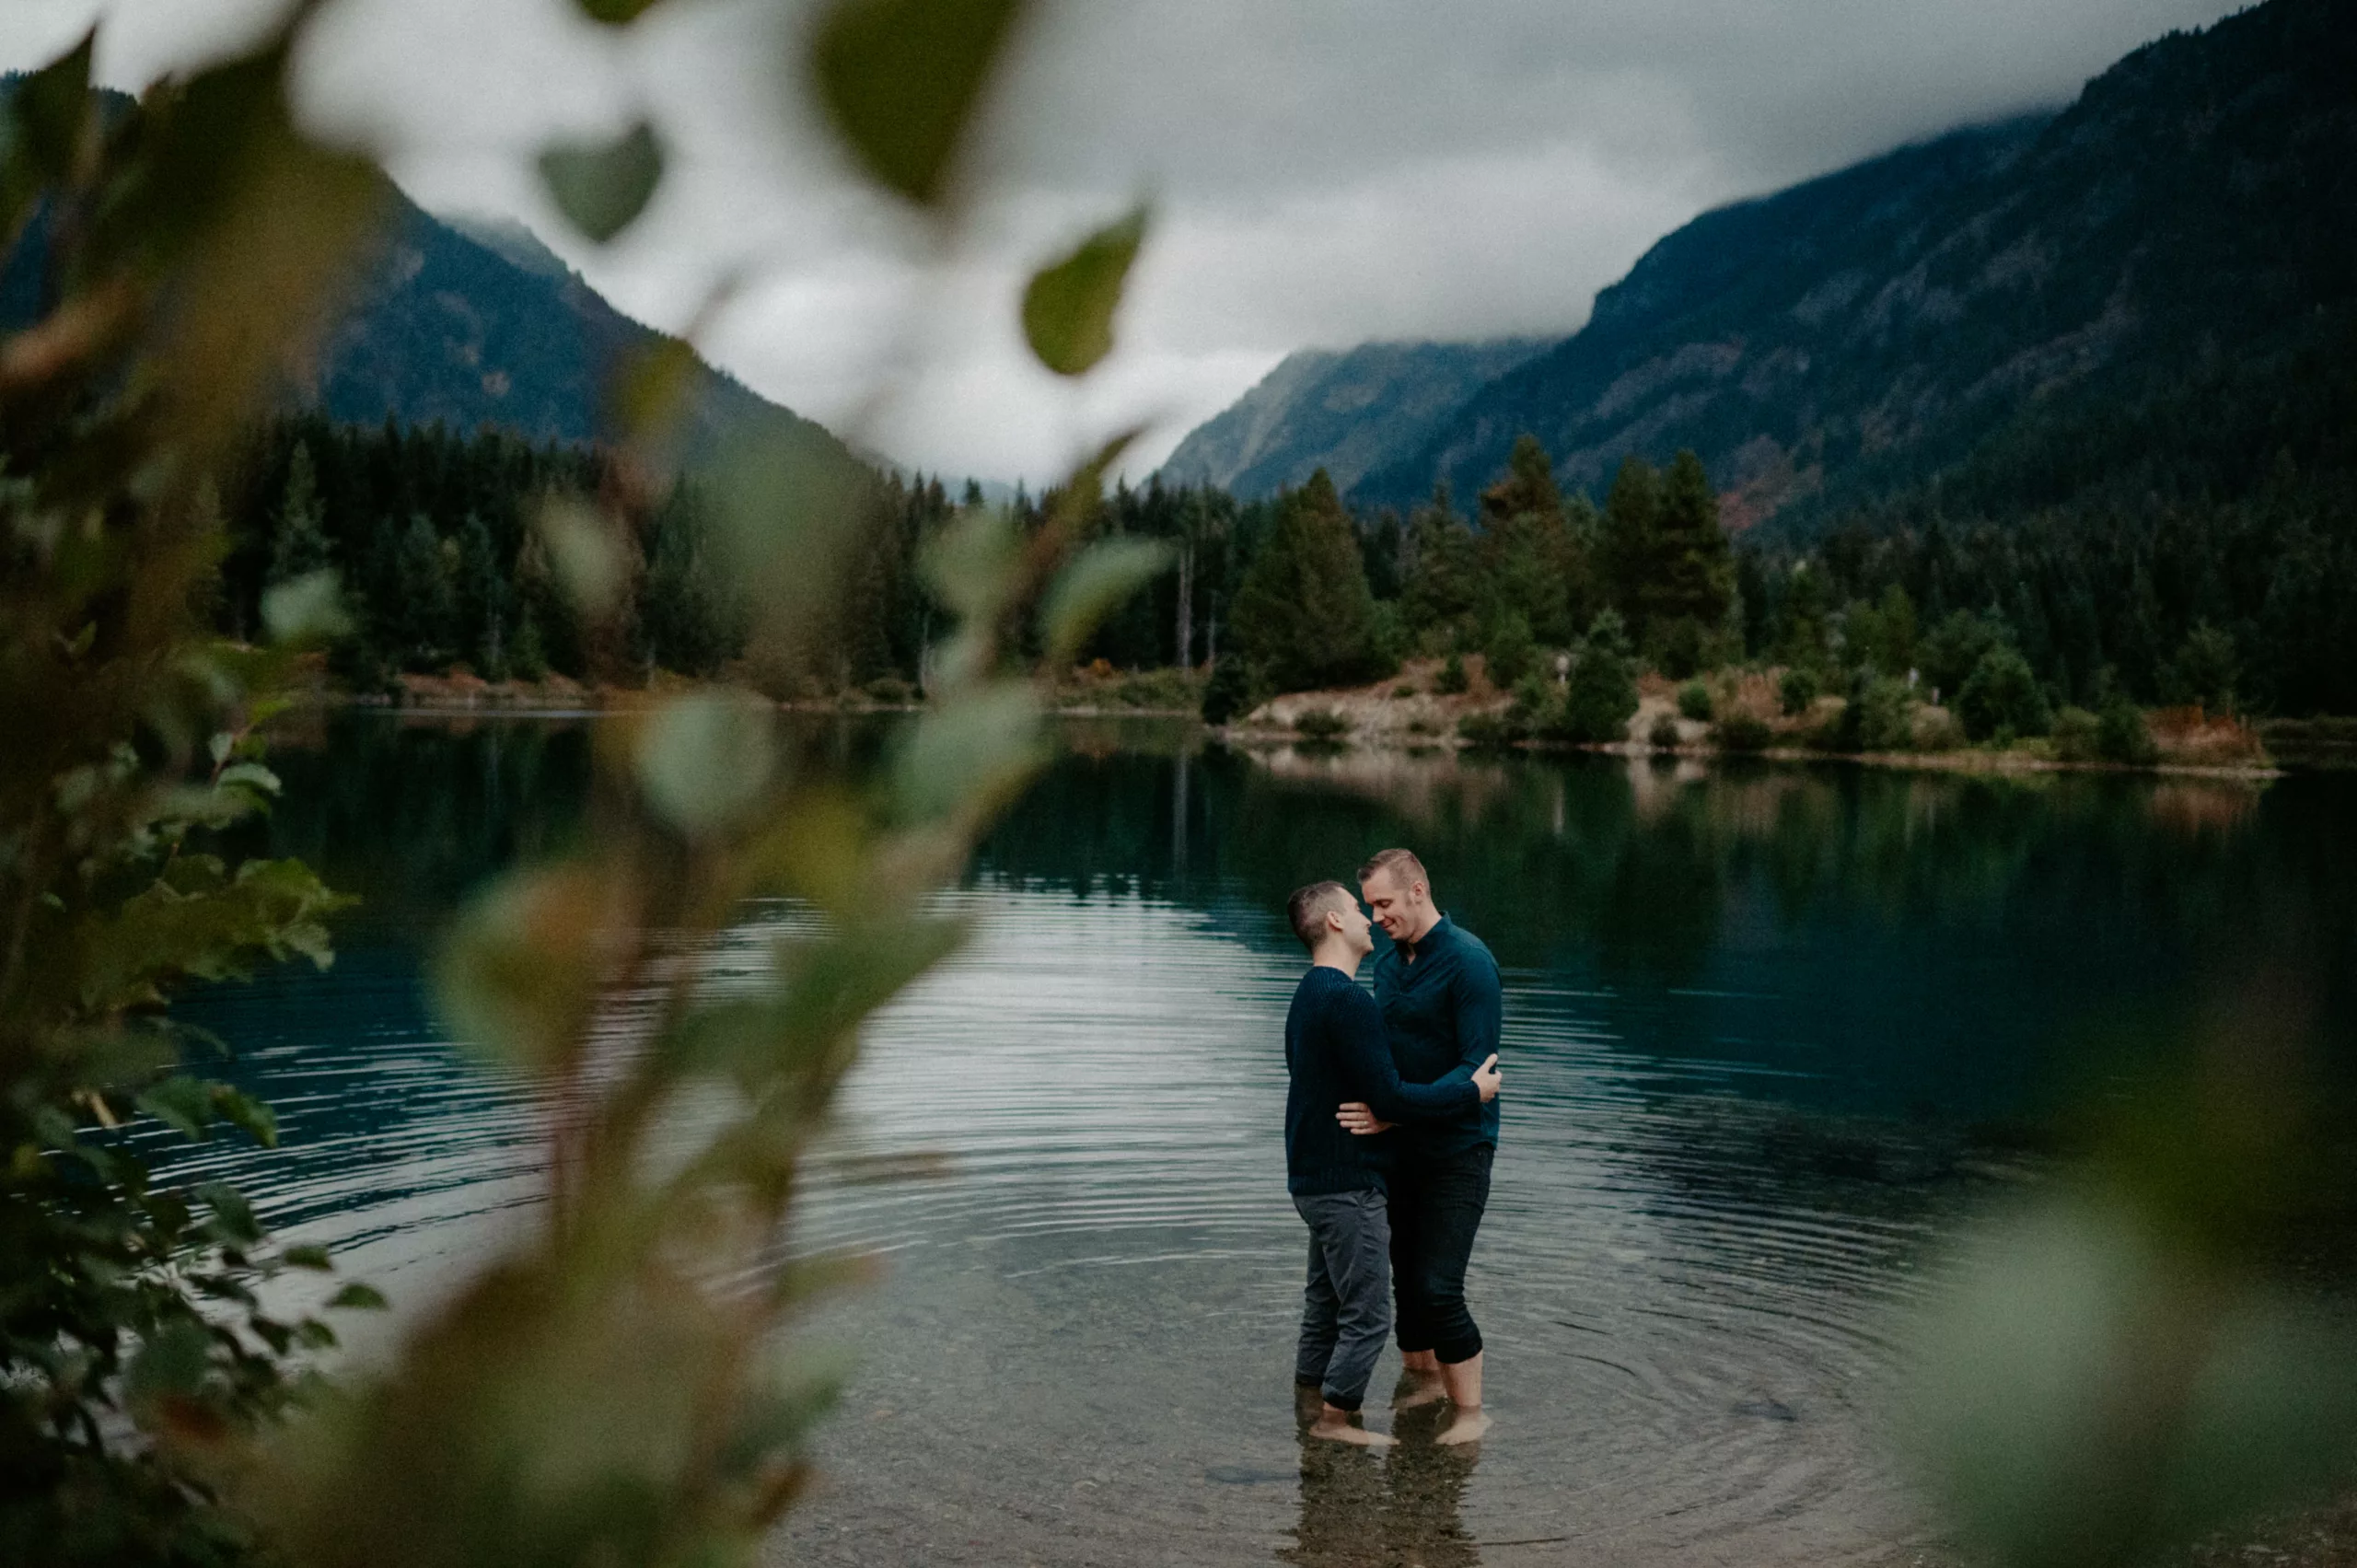 A romantic moment of a couple standing barefoot in a mountain lake, surrounded by forested hills and misty mountains.